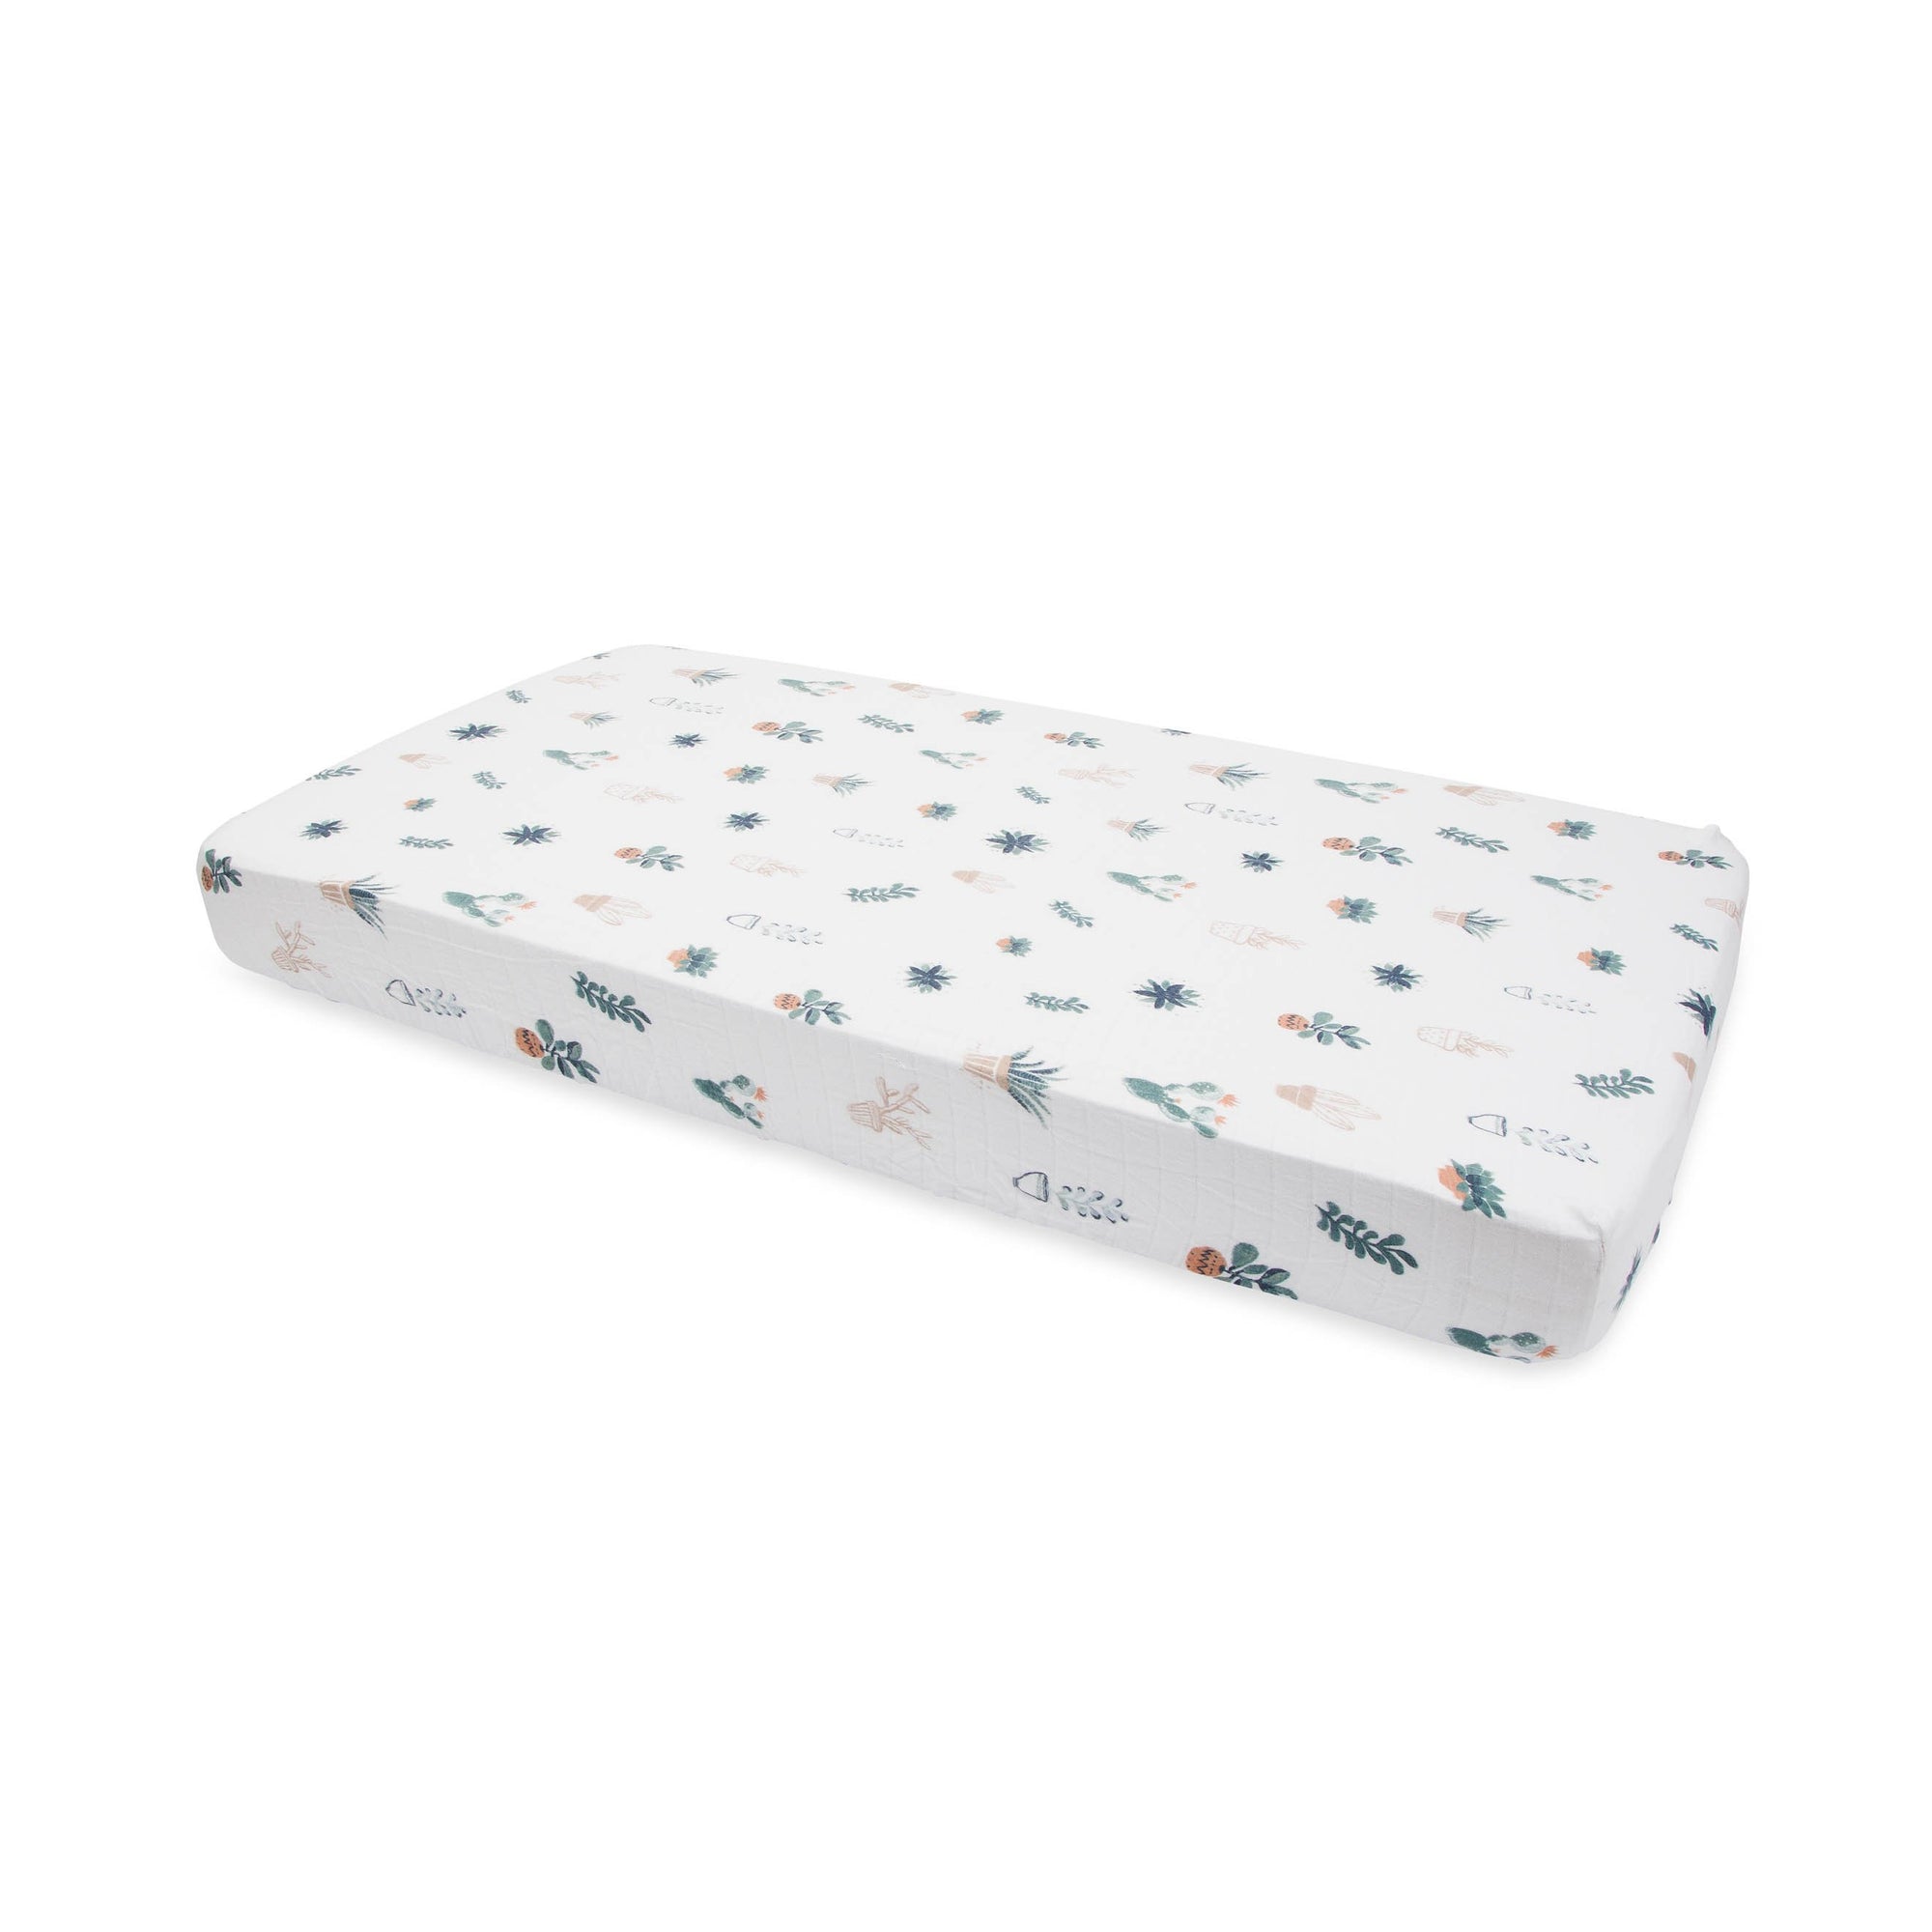 Cotton Muslin Changing Pad Covers